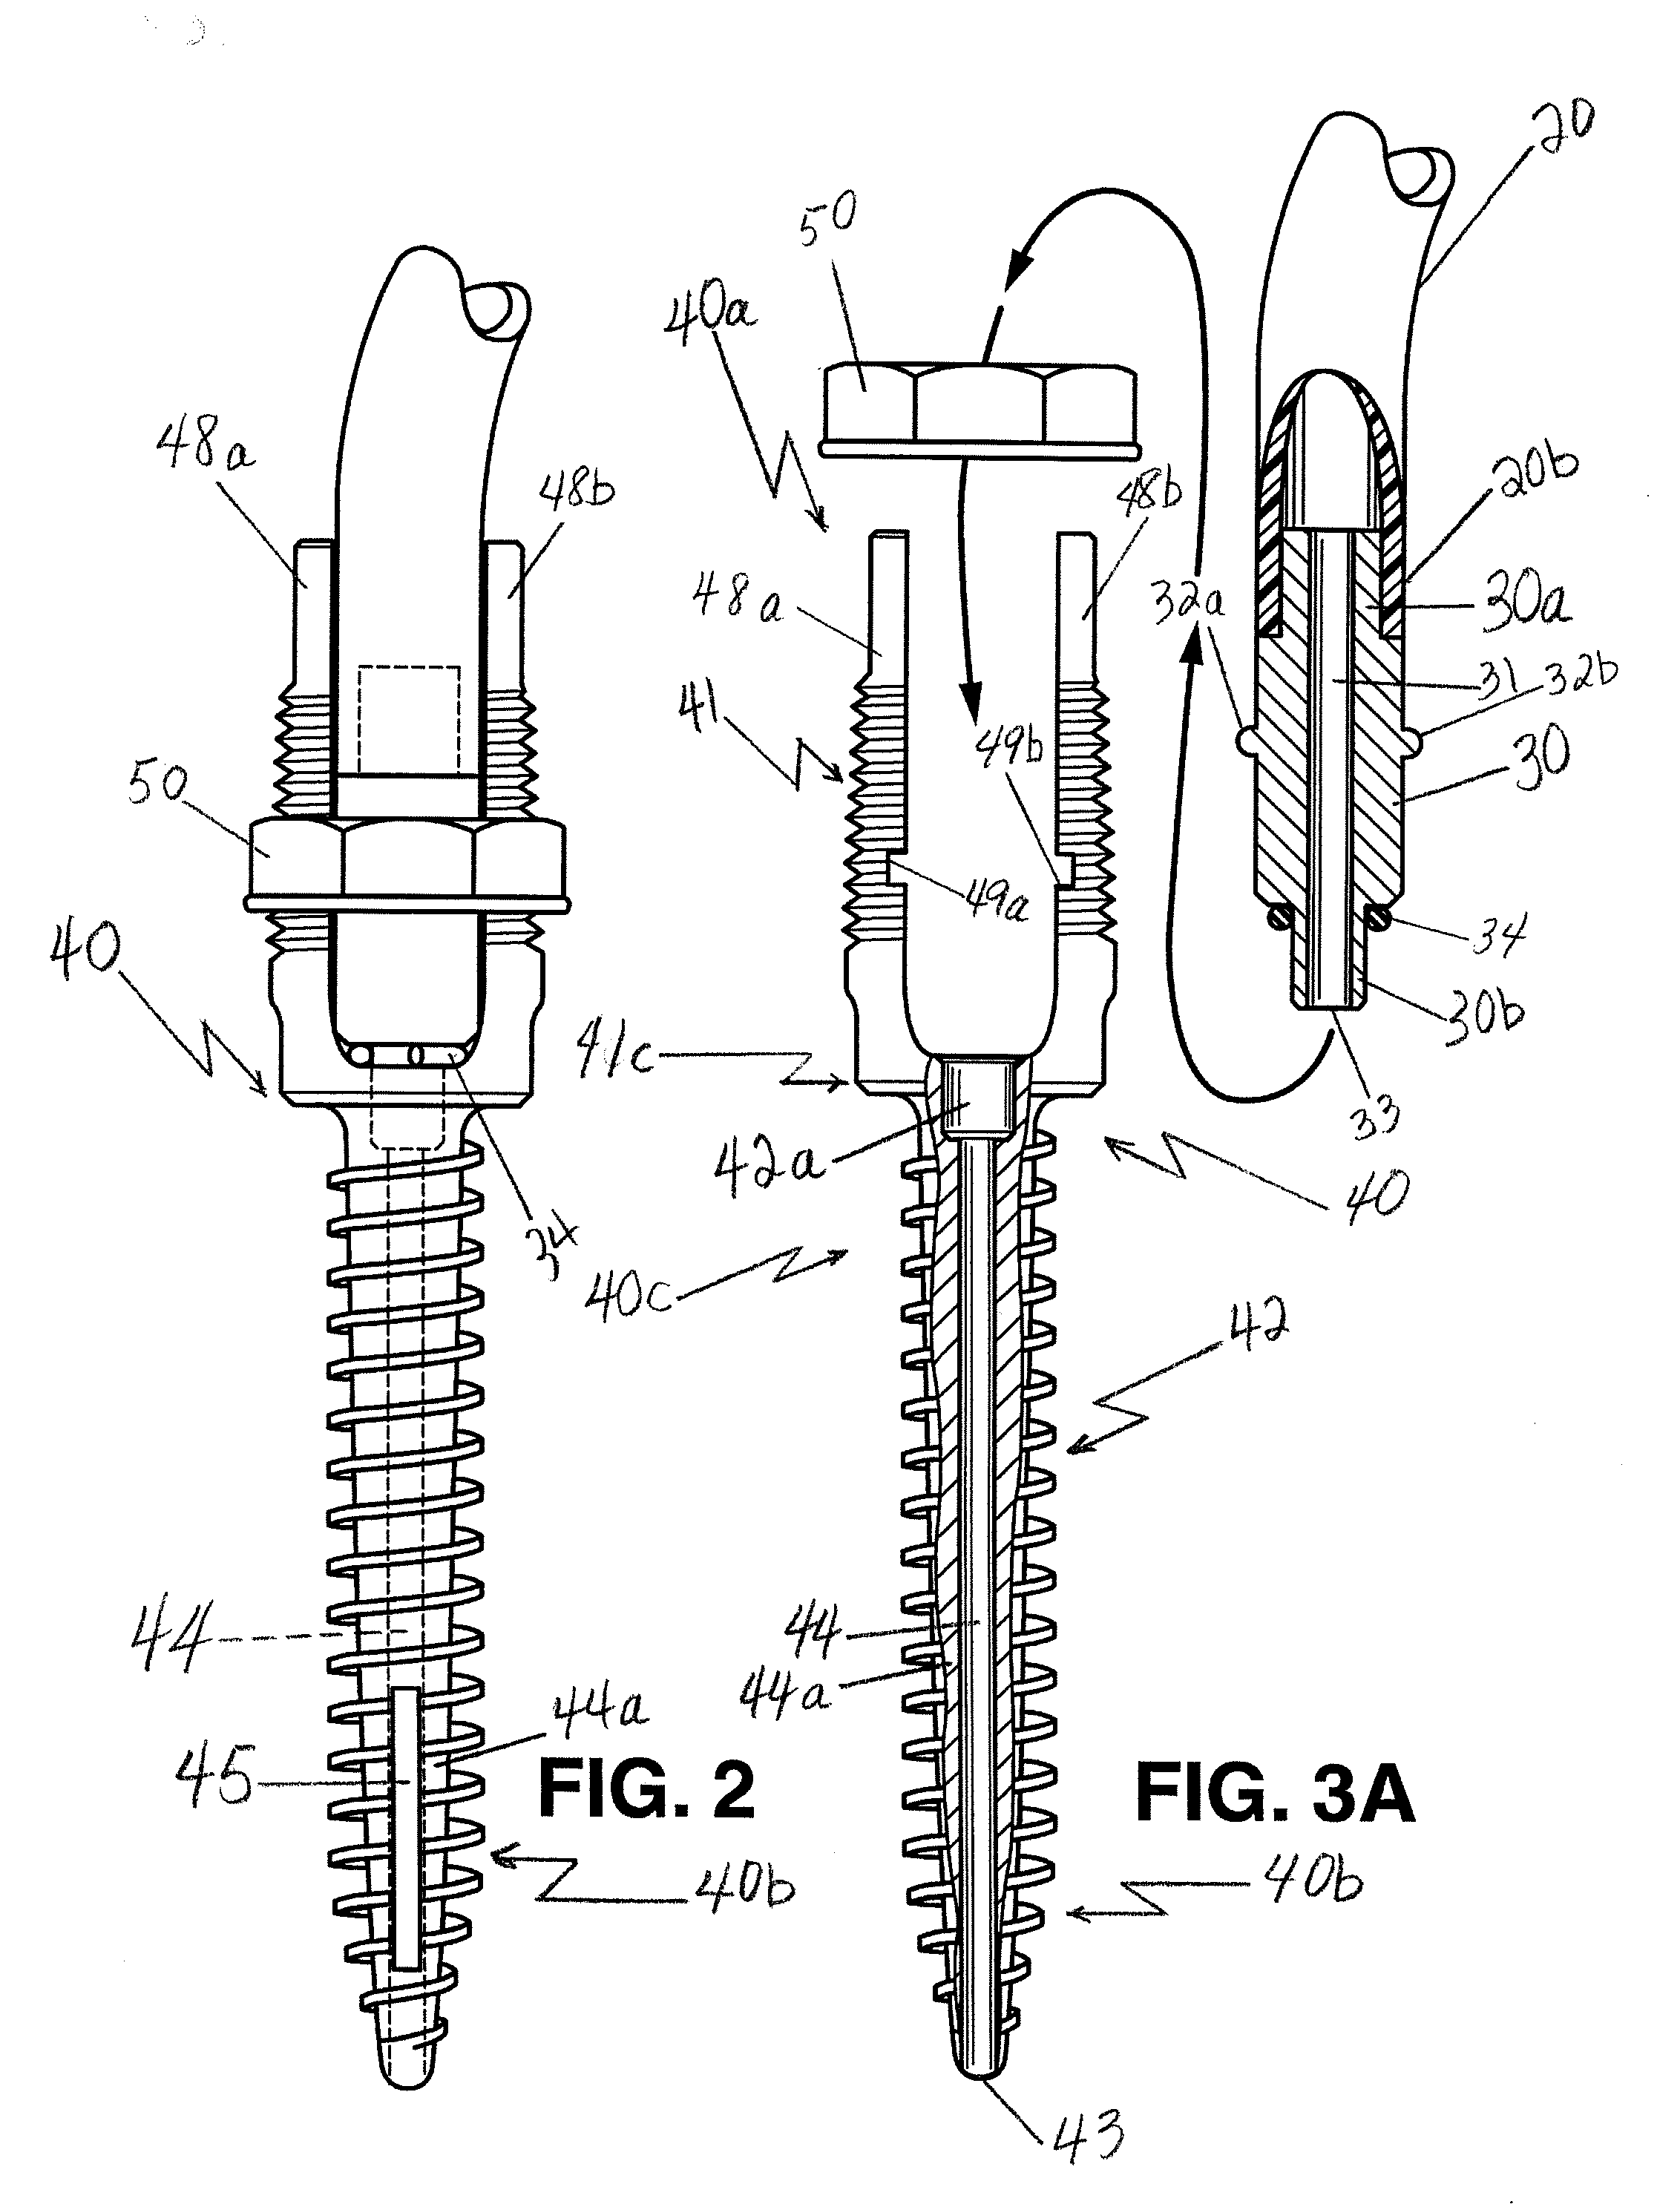 Method and apparatus for anchoring bone screws and injecting many types of high viscosity materials in areas surrounding bone